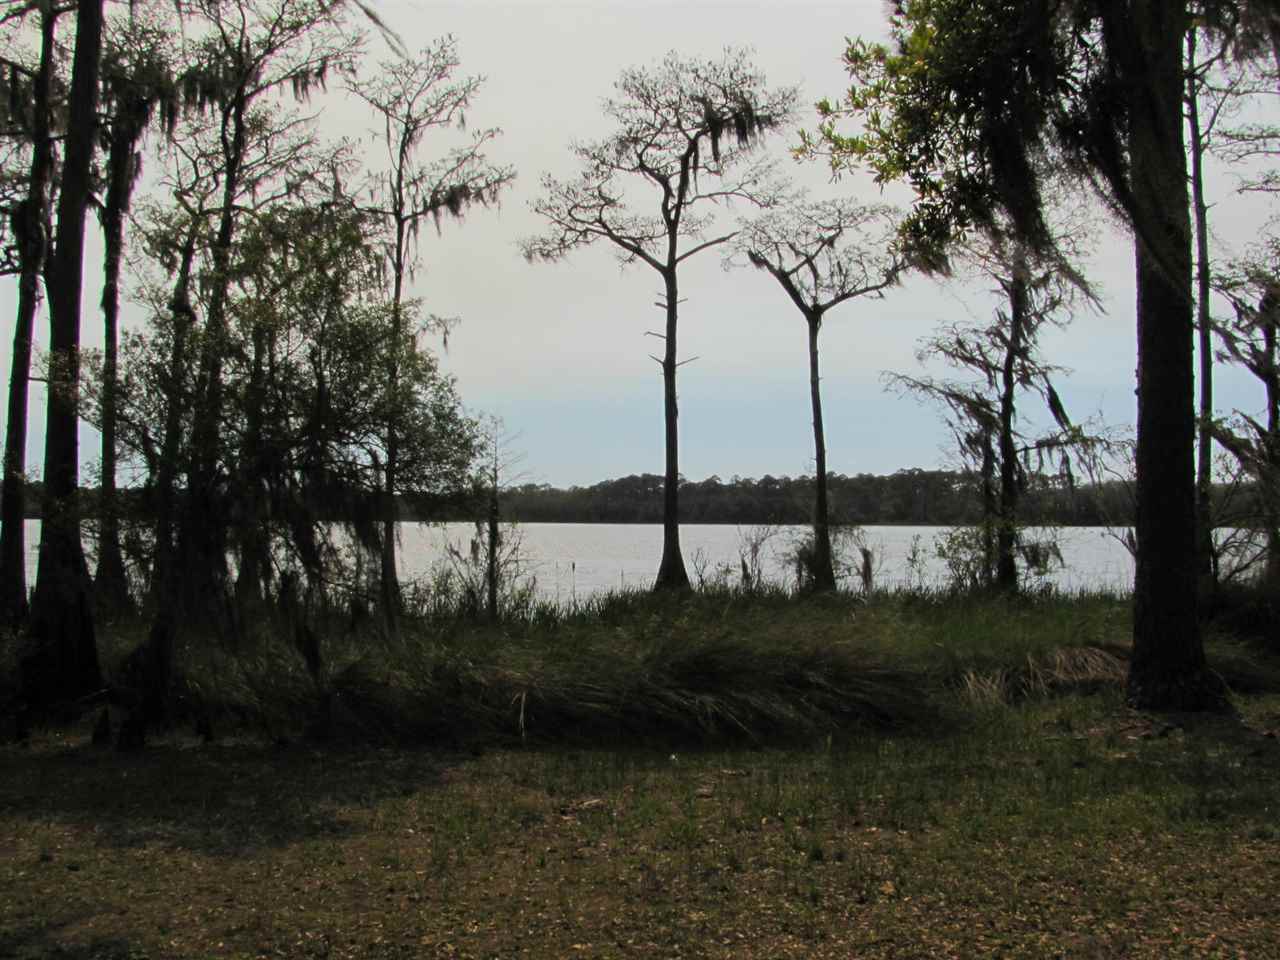 Lucy,PANACEA,Florida 32346,Lots and land,Lucy,364378